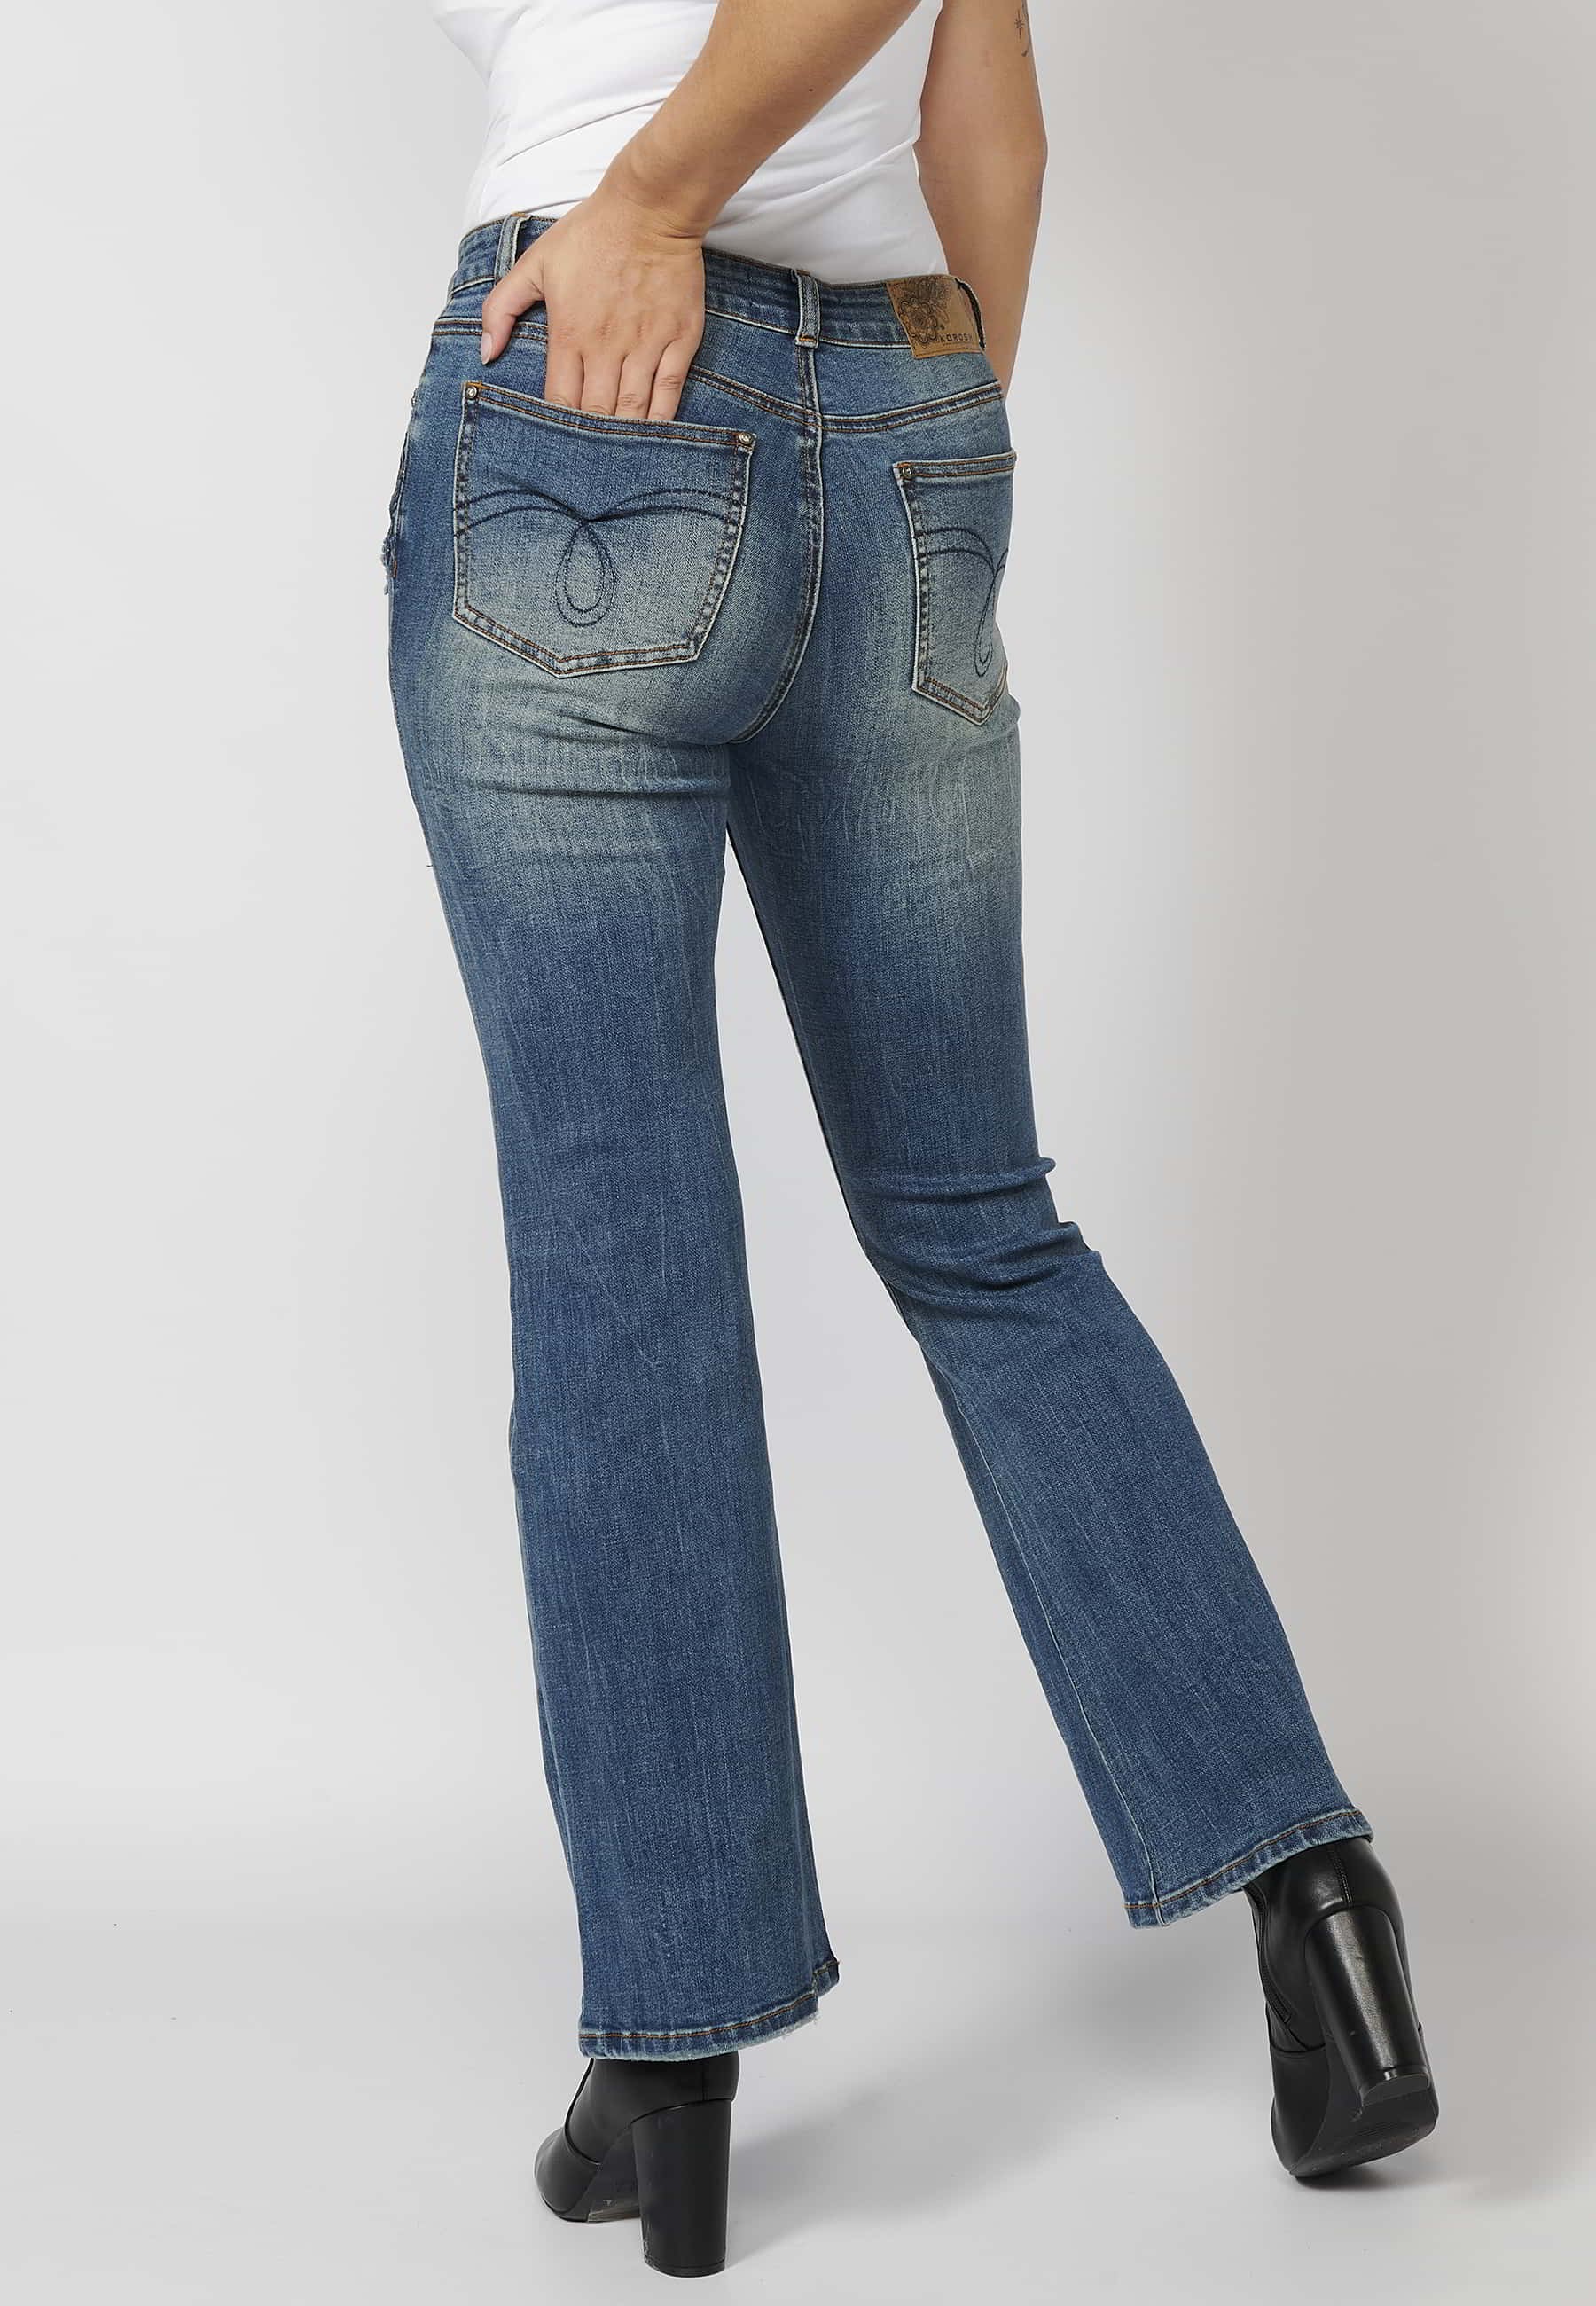 Long flared denim pants with embroidered details on the pockets in Dark Blue for Women